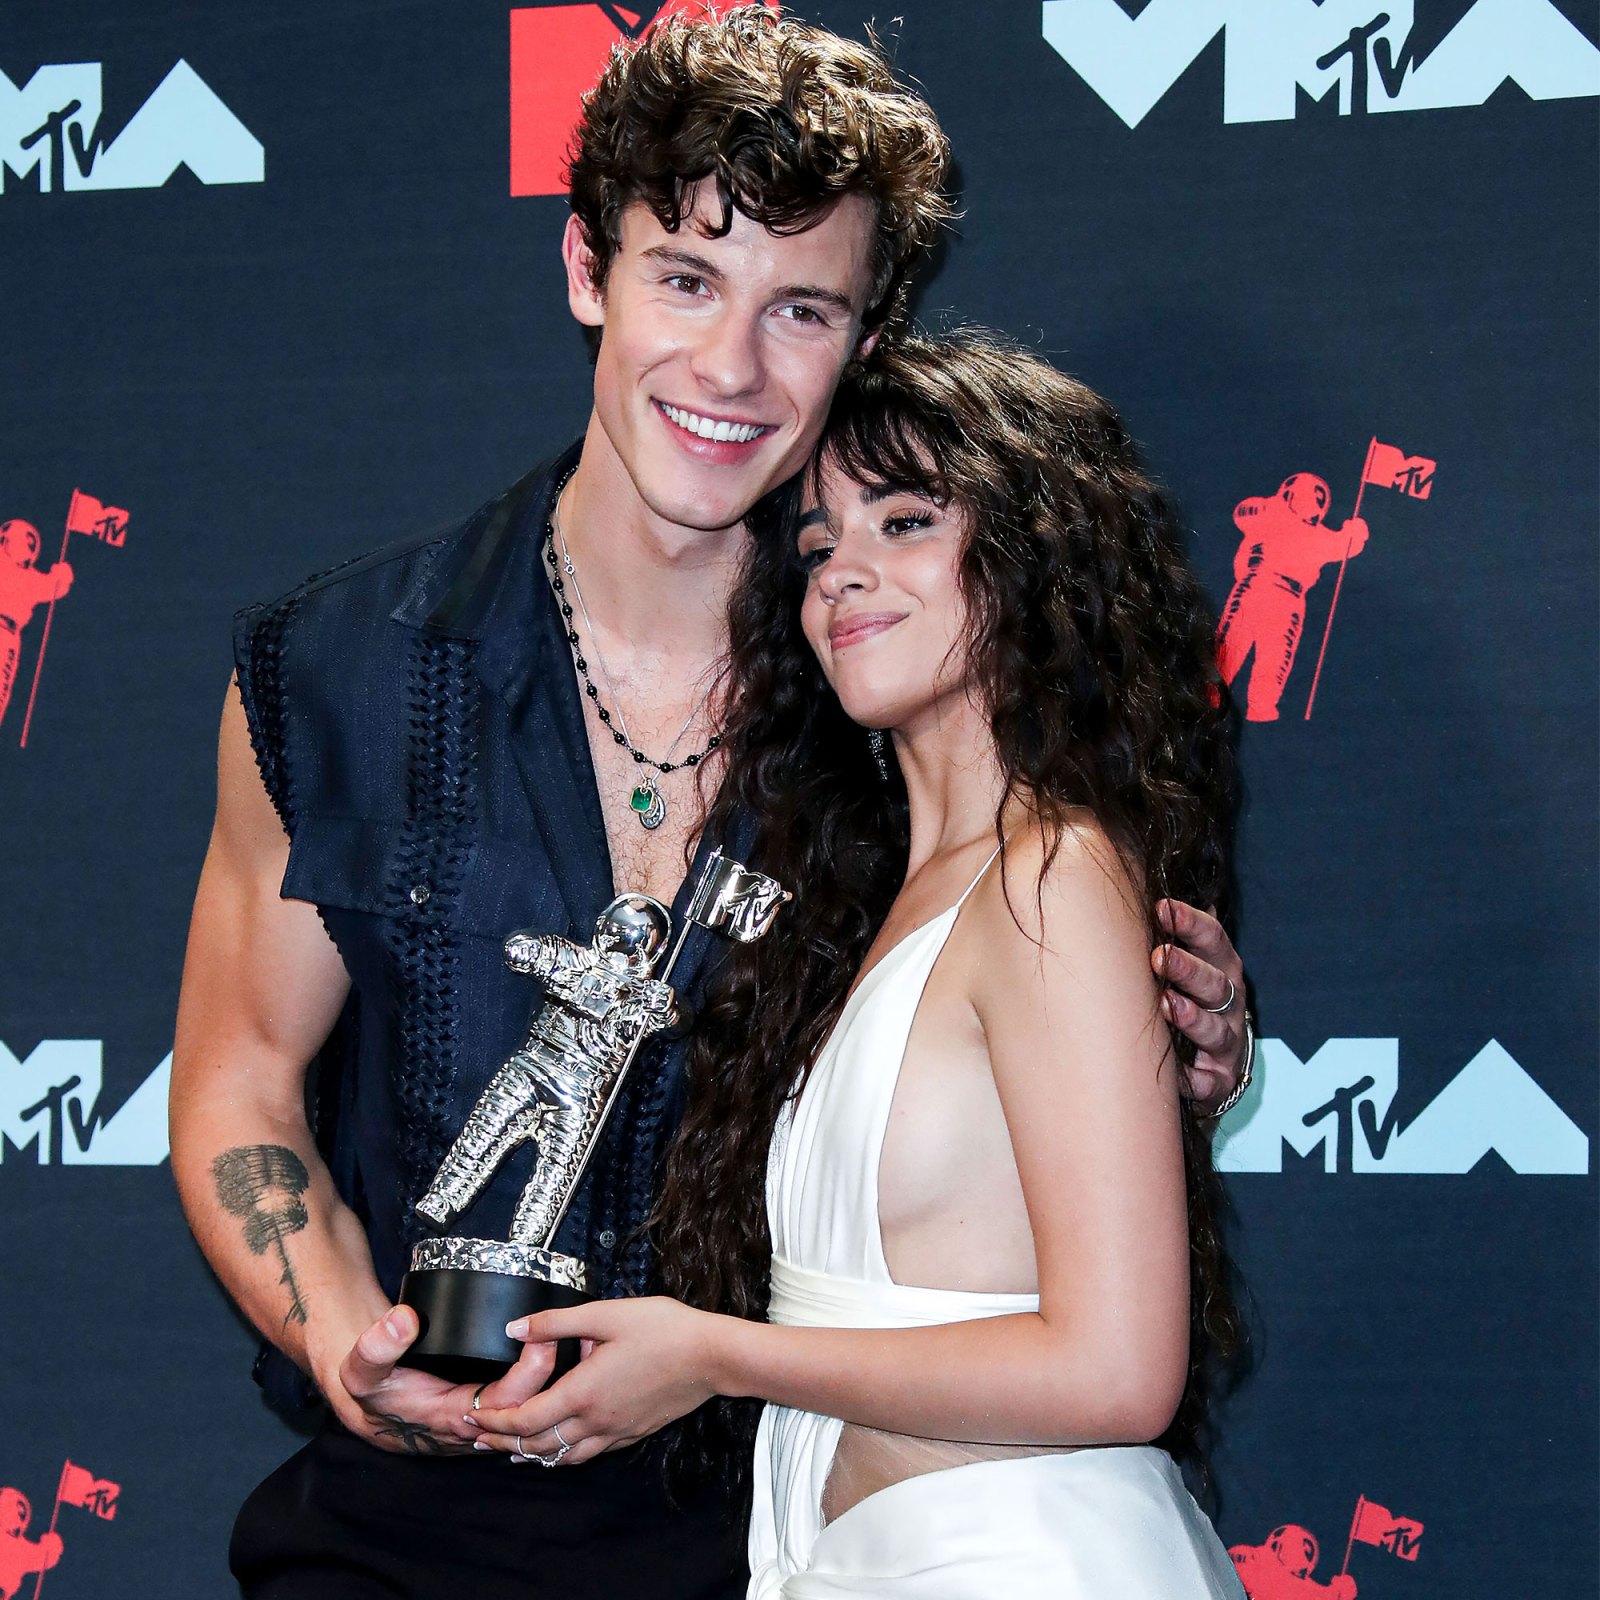 Why Did Camila Cabello And Shawn Mendes Break Up?